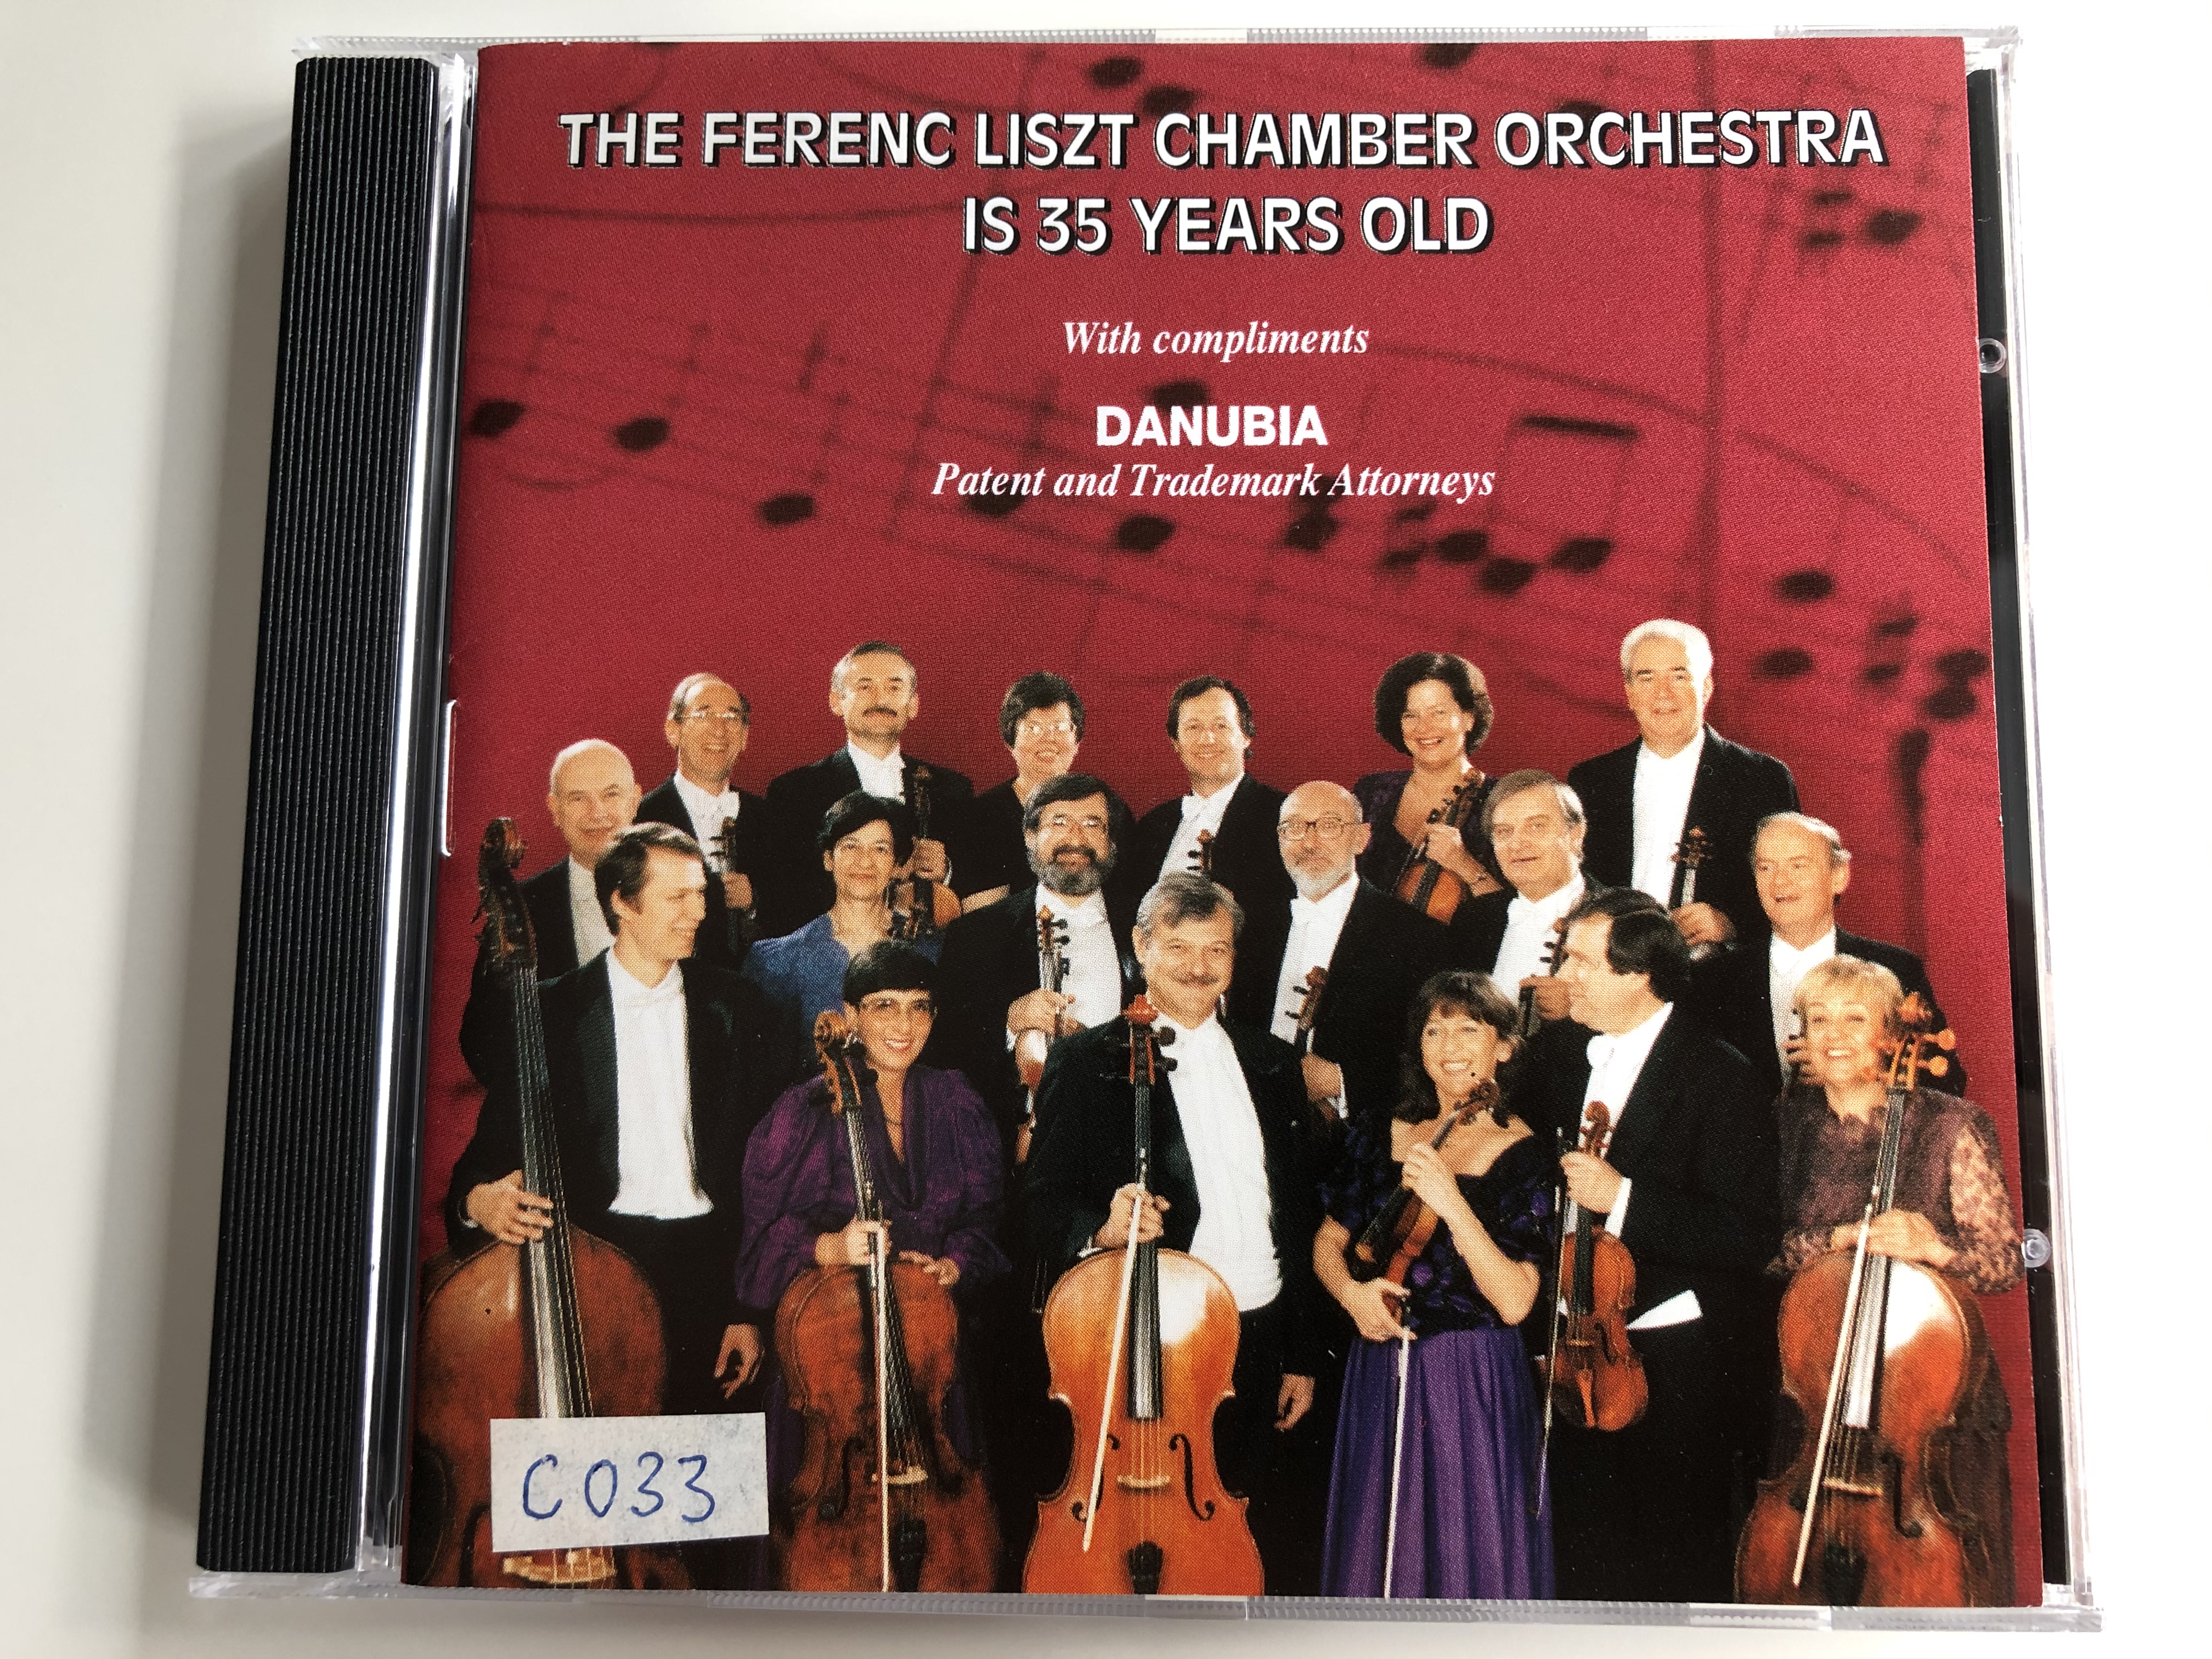 the-ferenc-liszt-chamber-orchestra-is-35-years-old-with-compliments-danubia-patent-and-trademark-attorneys-danubia-audio-cd-1998-lcfo-002-1-.jpg